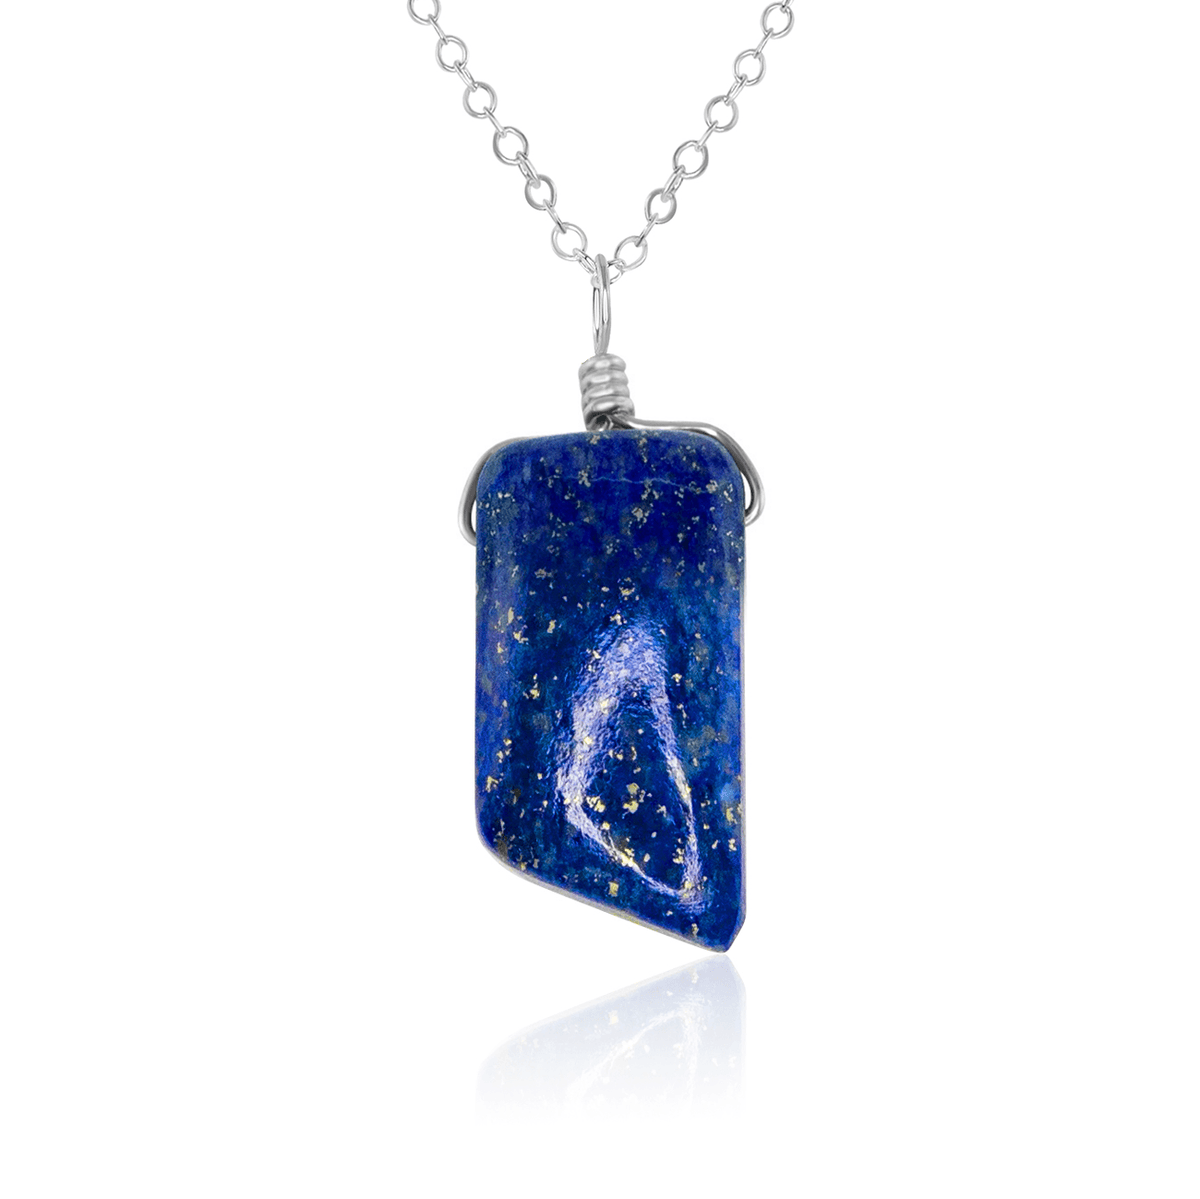 Small Smooth Lapis Lazuli Gentle Point Crystal Pendant Necklace - Small Smooth Lapis Lazuli Gentle Point Crystal Pendant Necklace - Sterling Silver / Cable - Luna Tide Handmade Crystal Jewellery